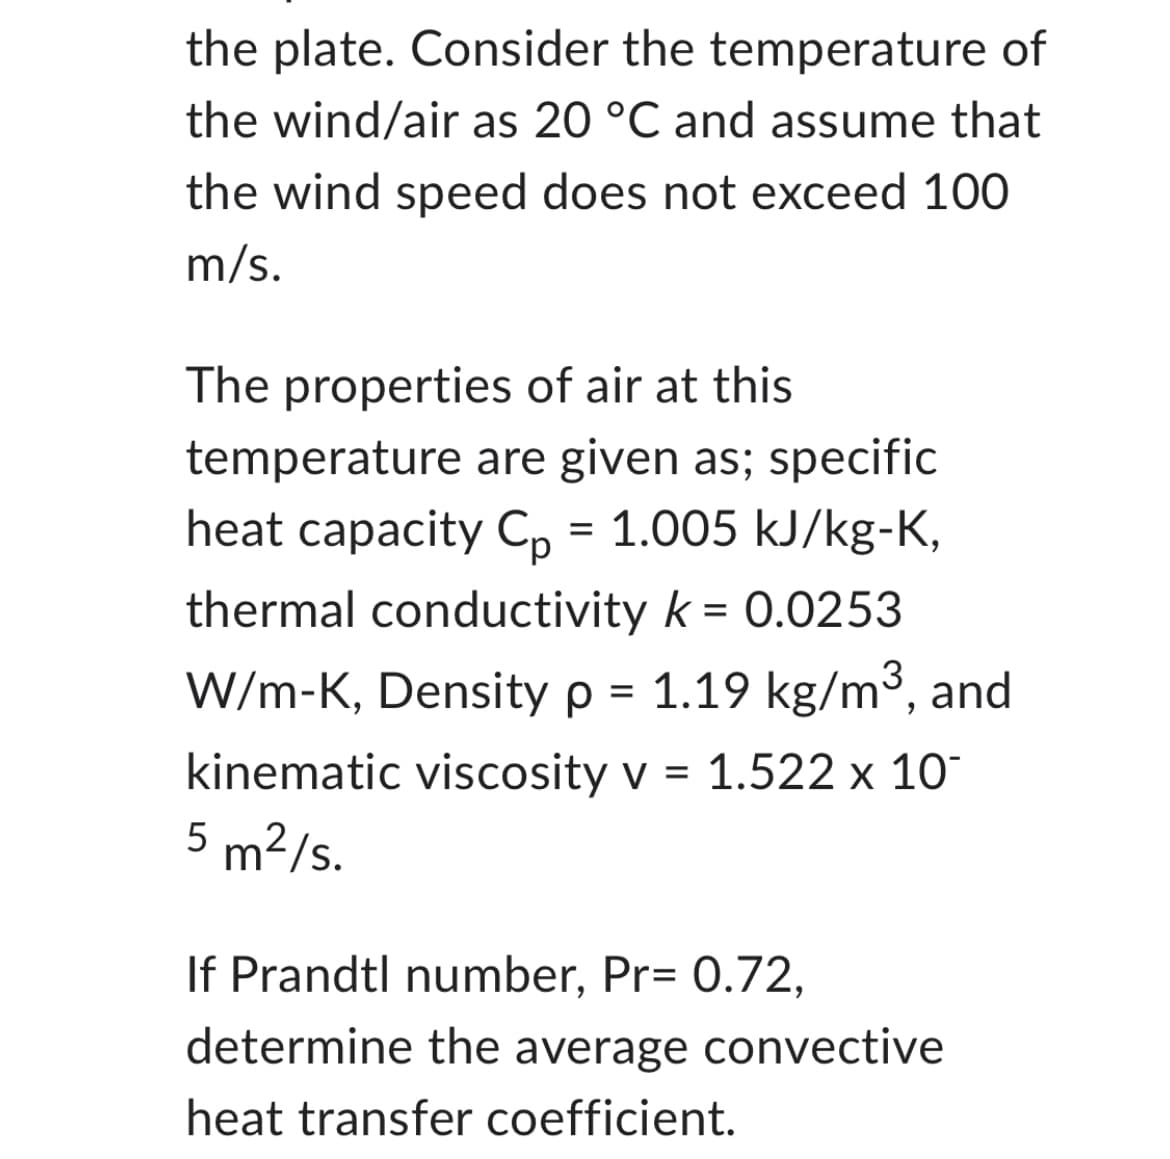 the plate. Consider the temperature of
the wind/air as 20 °C and assume that
the wind speed does not exceed 100
m/s.
The properties of air at this
temperature are given as; specific
heat capacity Cp = 1.005 kJ/kg-K,
thermal conductivity k = 0.0253
W/m-K, Density p = 1.19 kg/m³, and
kinematic viscosity v = 1.522 x 10
5 m²/s.
If Prandtl number, Pr= 0.72,
determine the average convective
heat transfer coefficient.